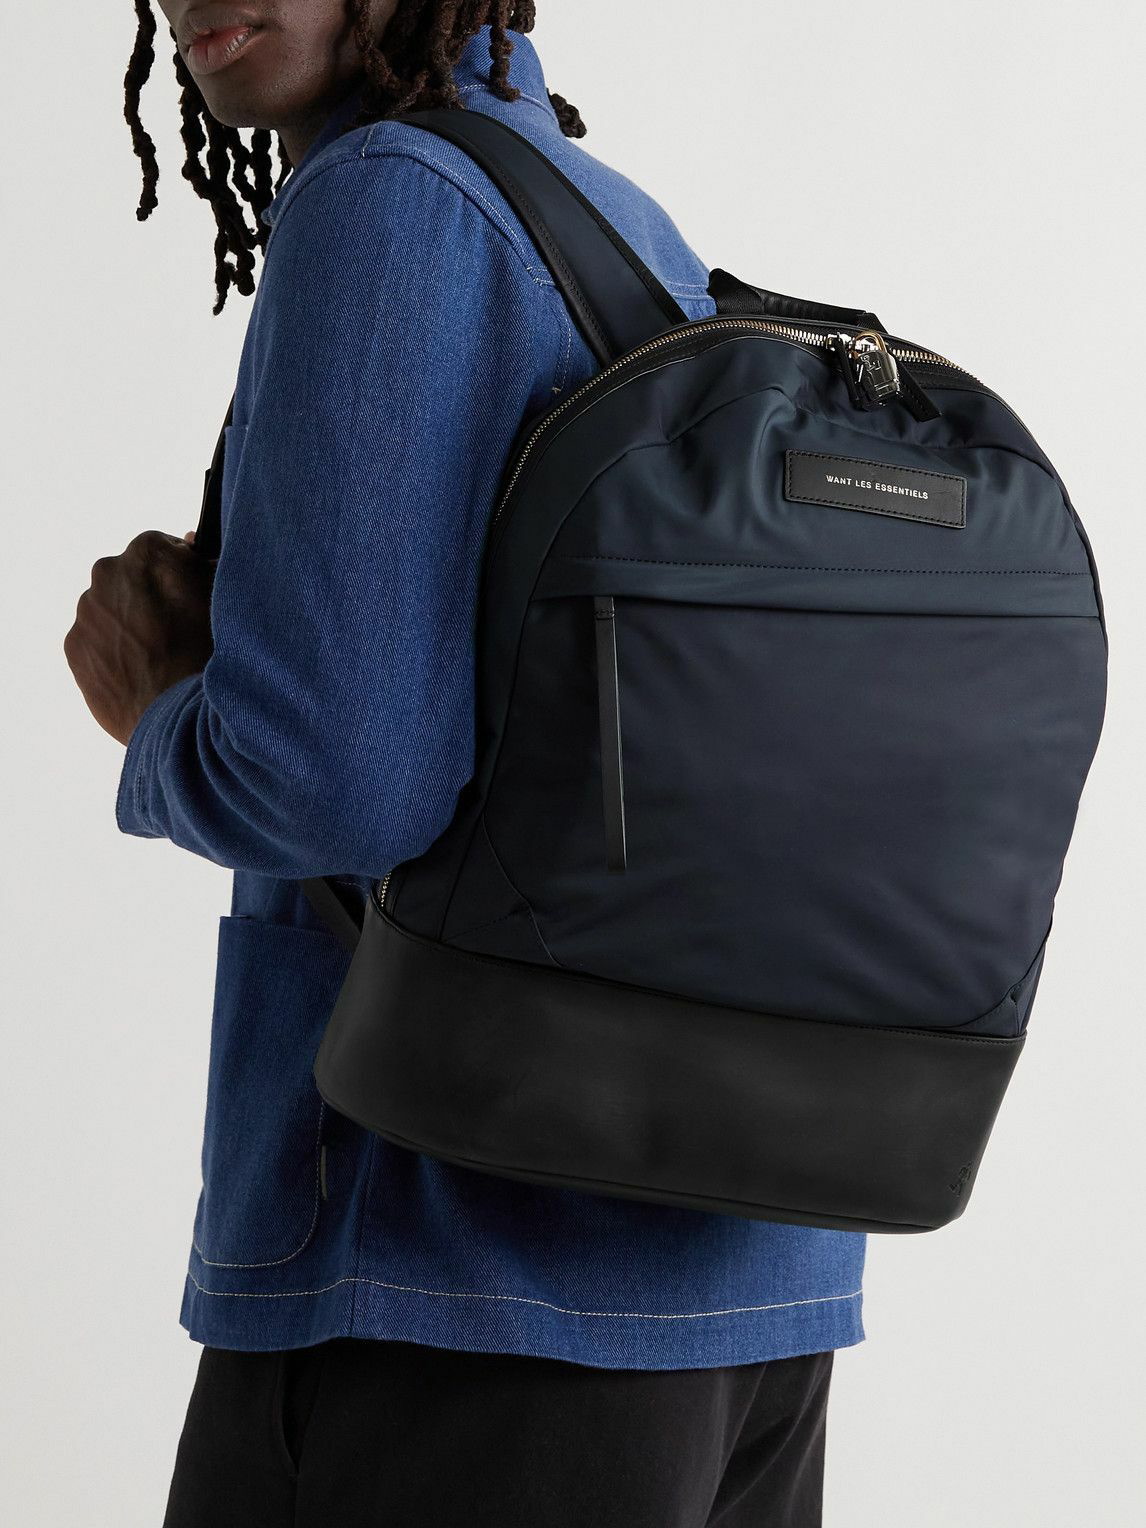 WANT LES ESSENTIELS - Kastrup 2.0 Leather-Trimmed Nylon Backpack Want ...